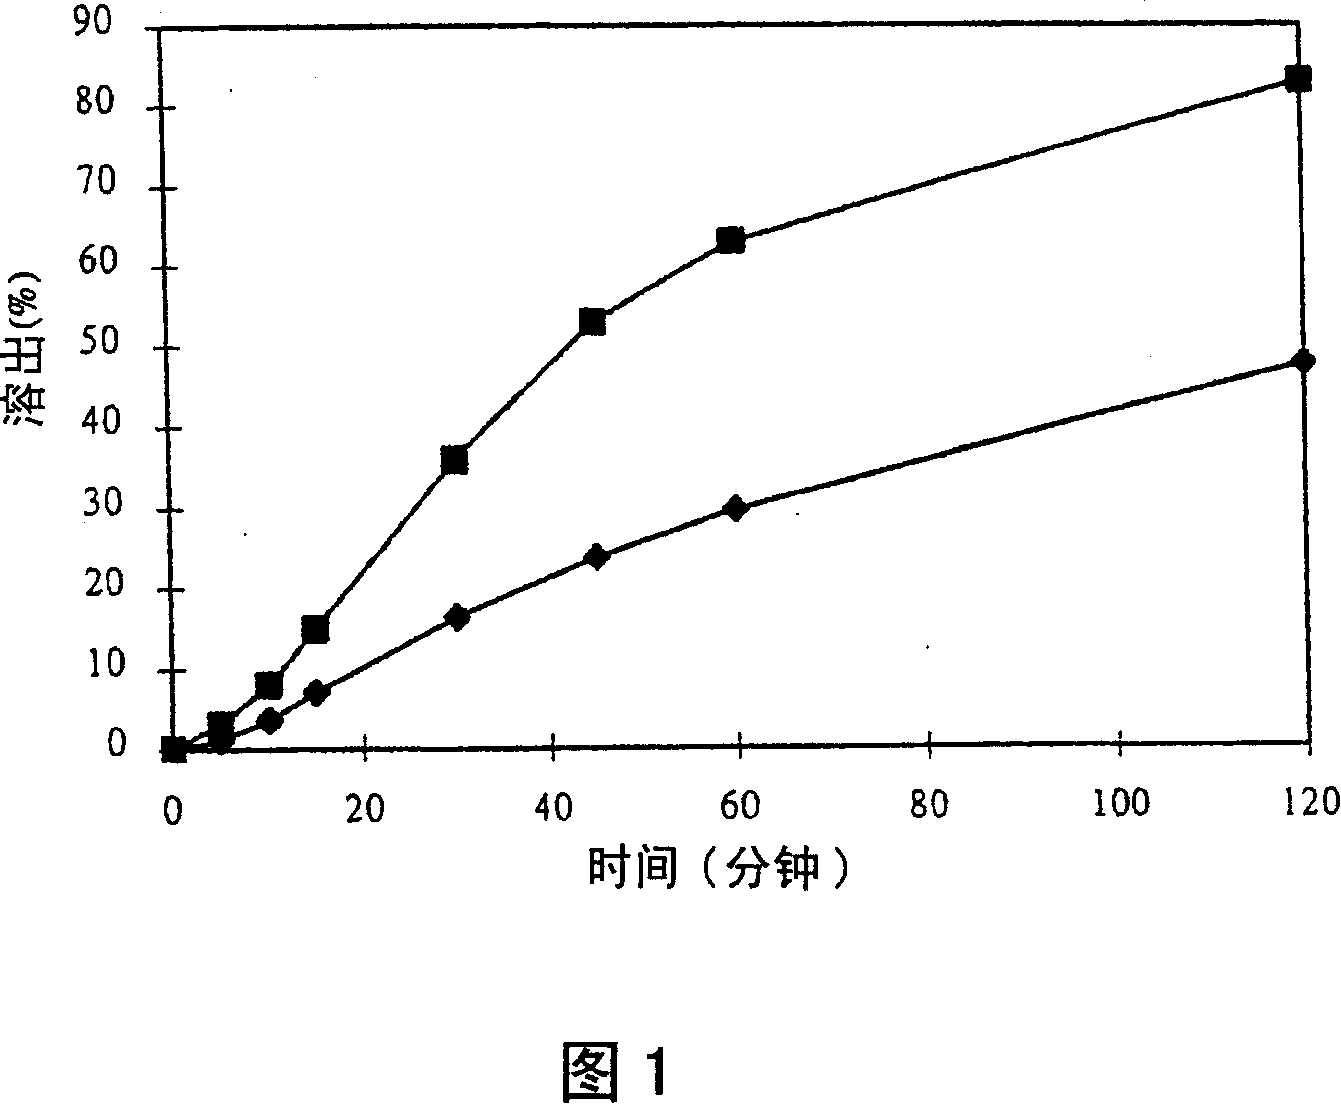 Oral formulation containing itraconazole and methods for manufacturing and using the same